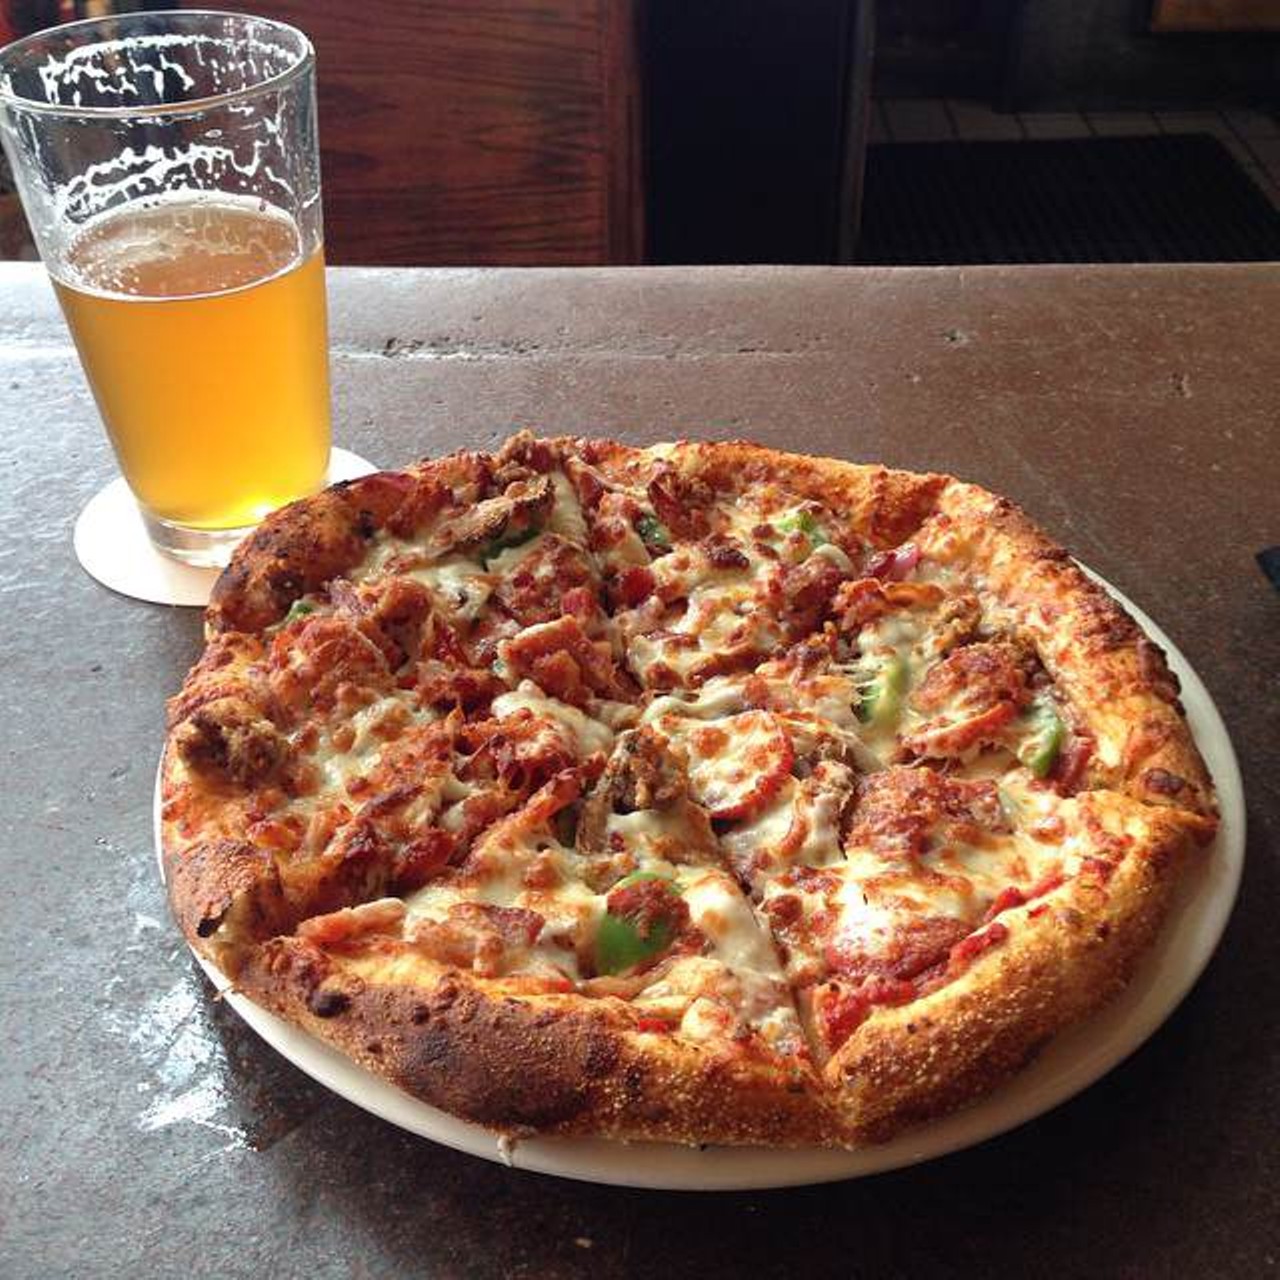 Motor City Brewing Works - Have a Michigan-brewed beer along with a piping hot, brick-oven baked pizza. Photo via Matt Zurbrick, Instagram